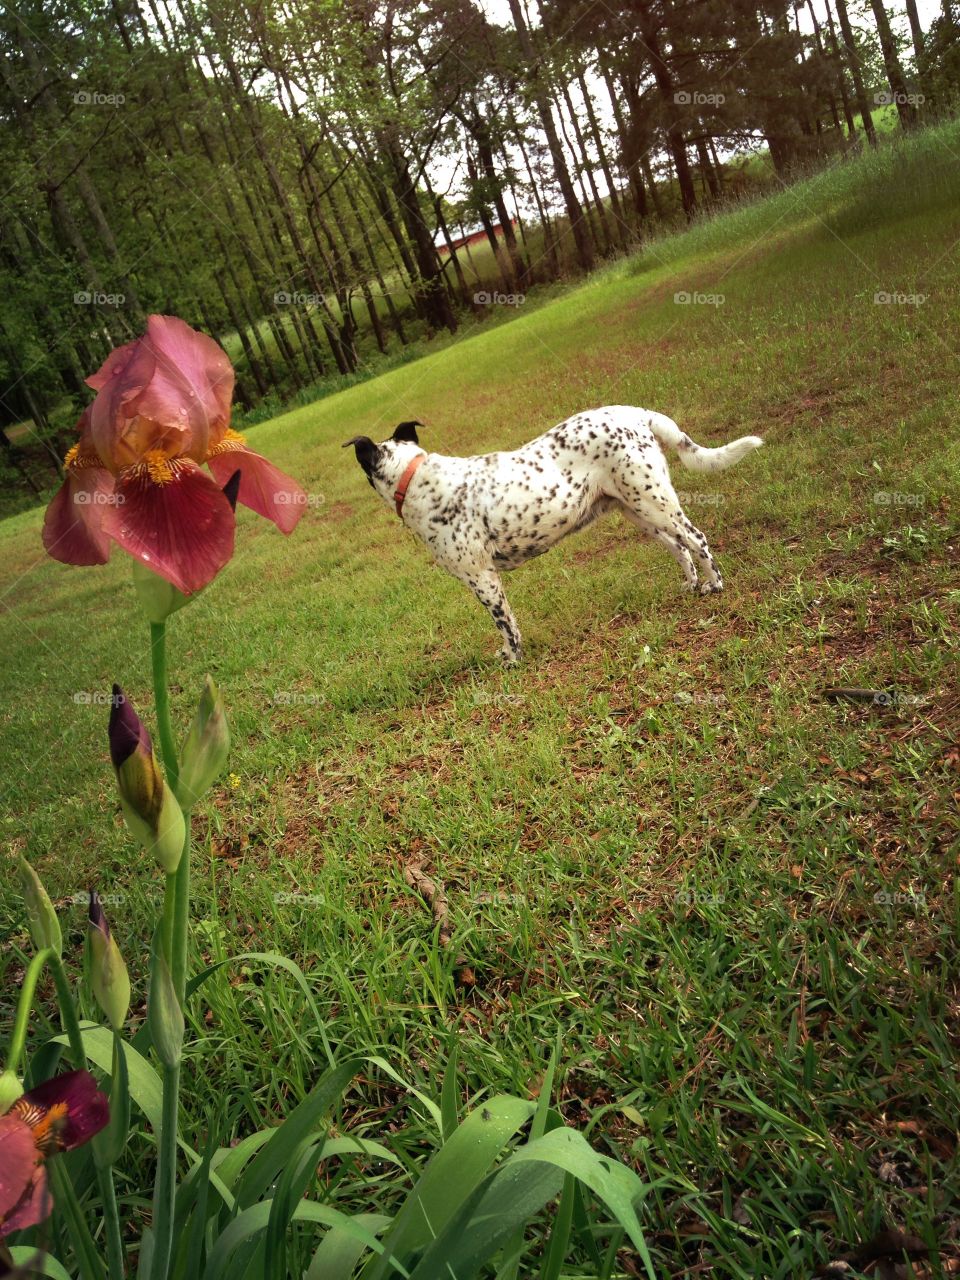 Dogs curiosity . Flowers soak in the breaking sun after a long spring rain. While Dottie hears something mysterious in the distance